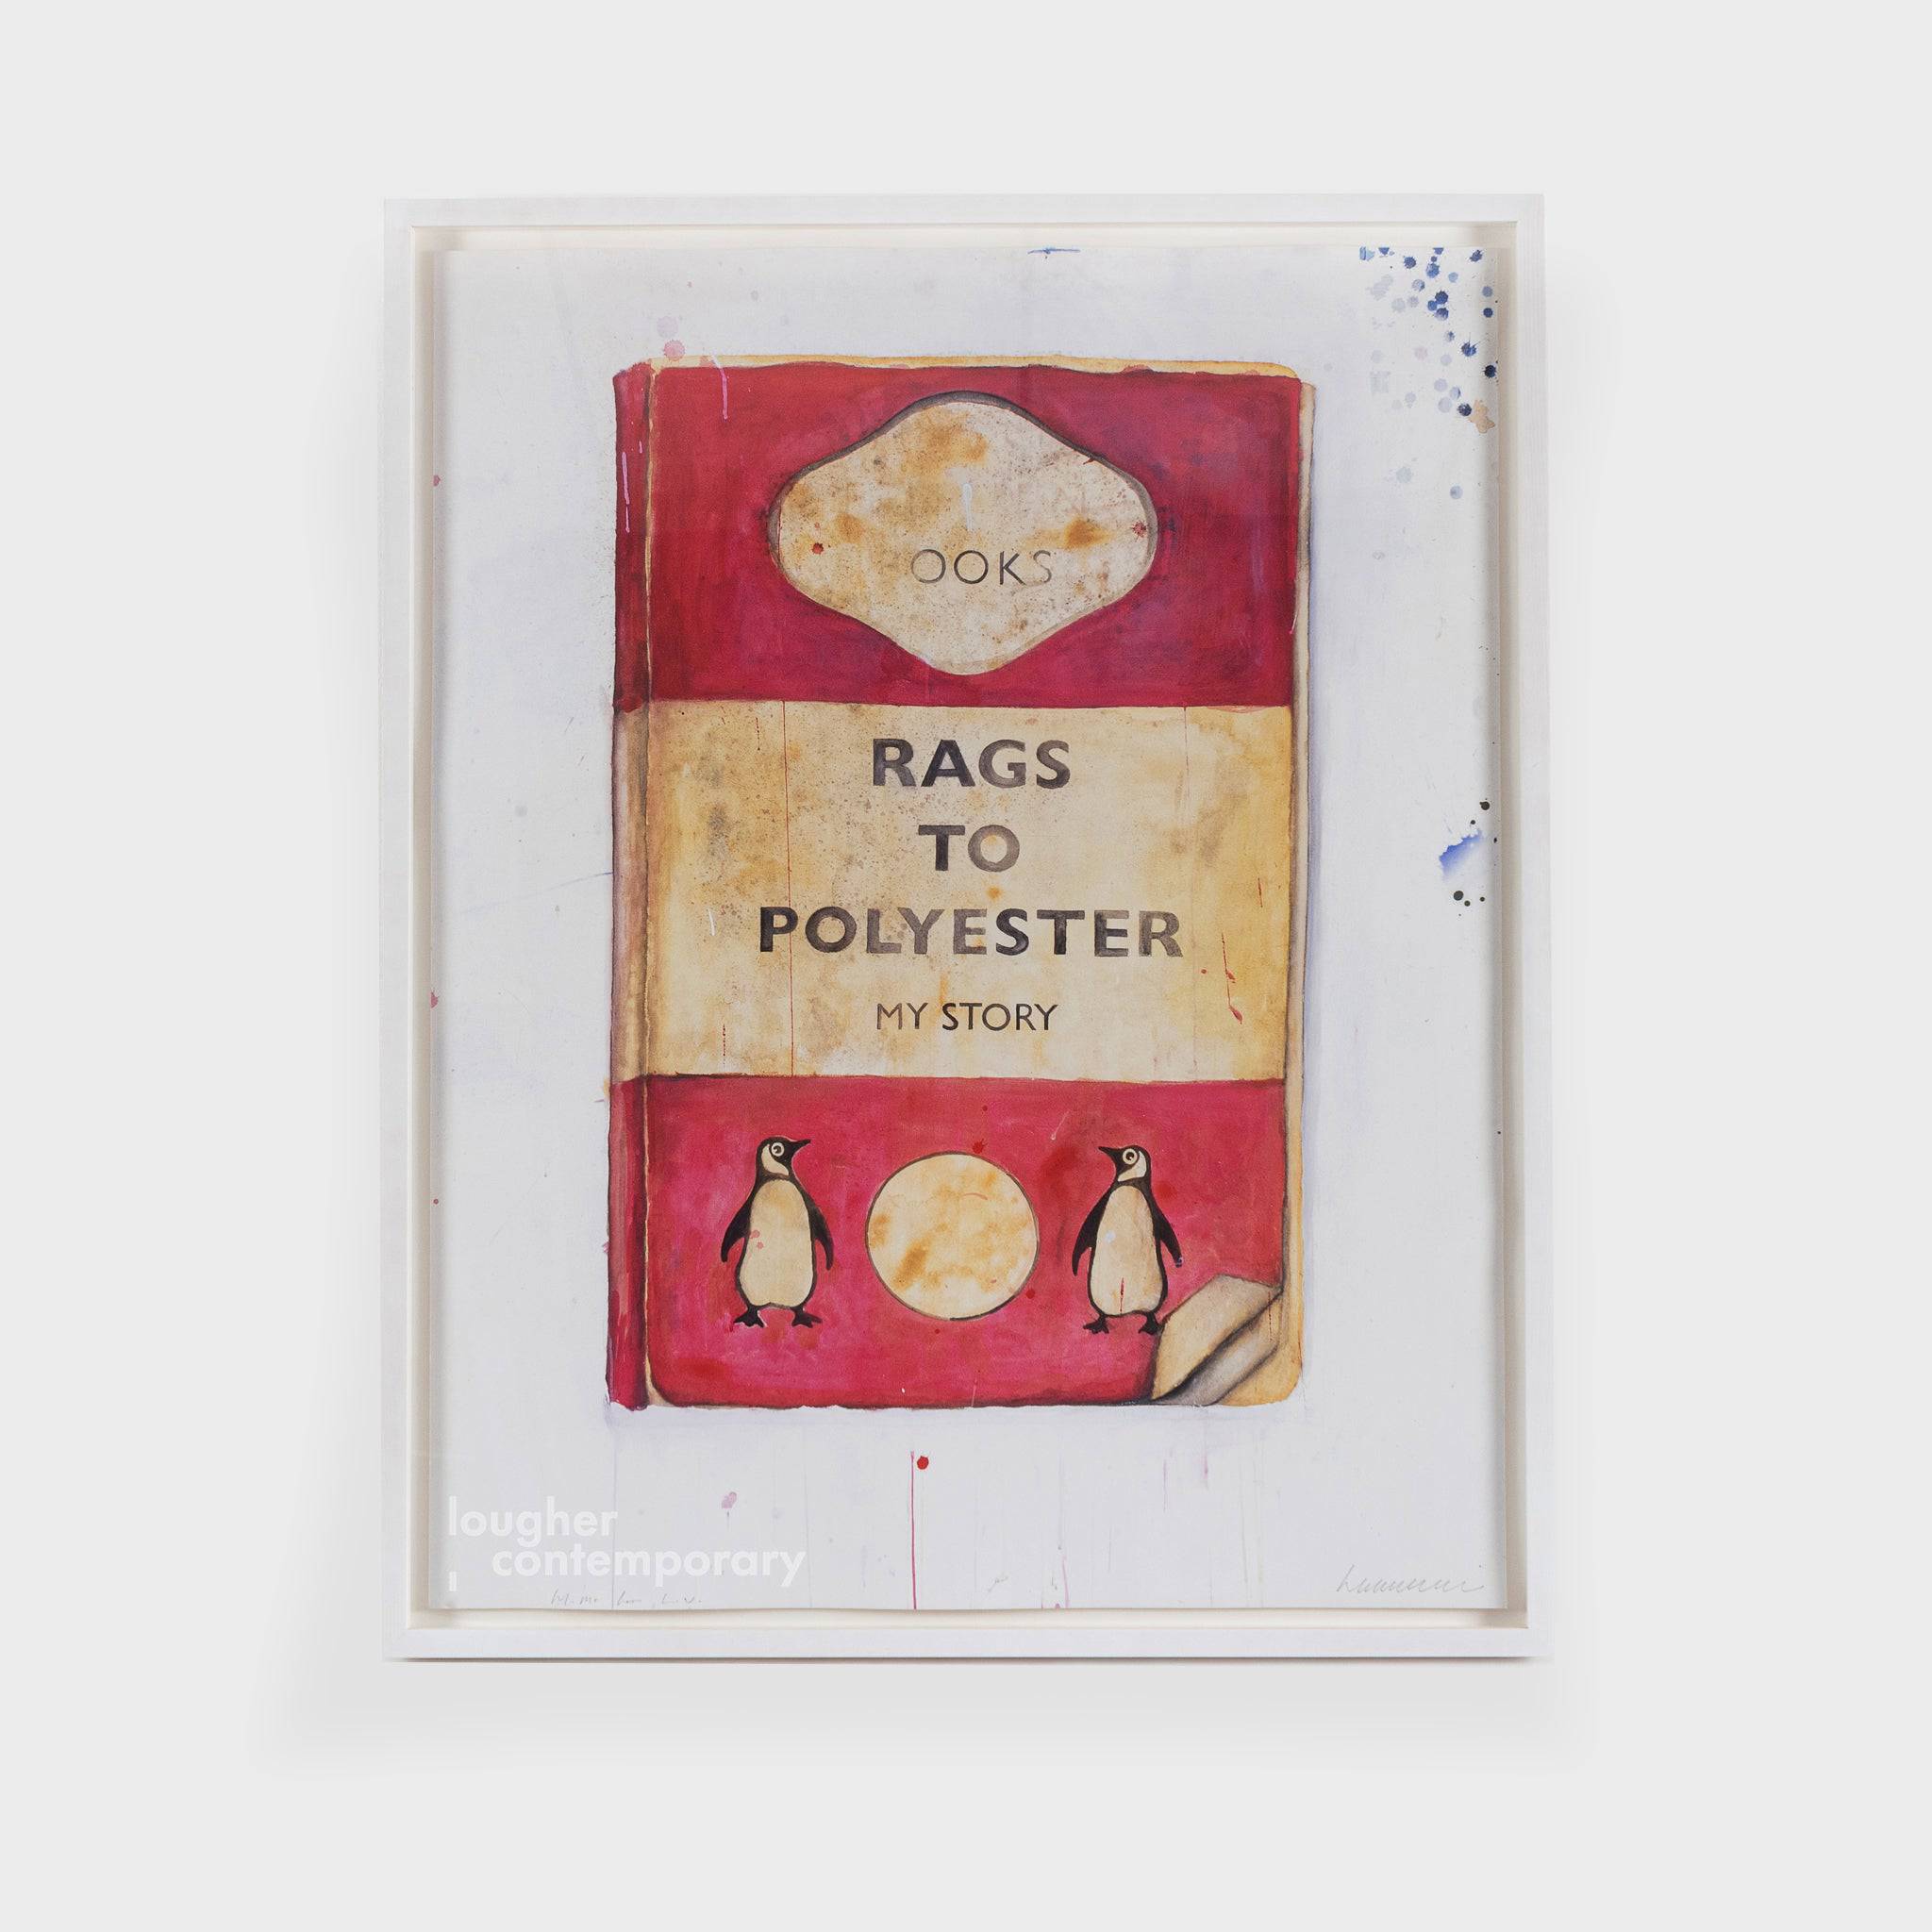 Harland Miller, Rags to Polyester, 2014 For Sale - Lougher Contemporary